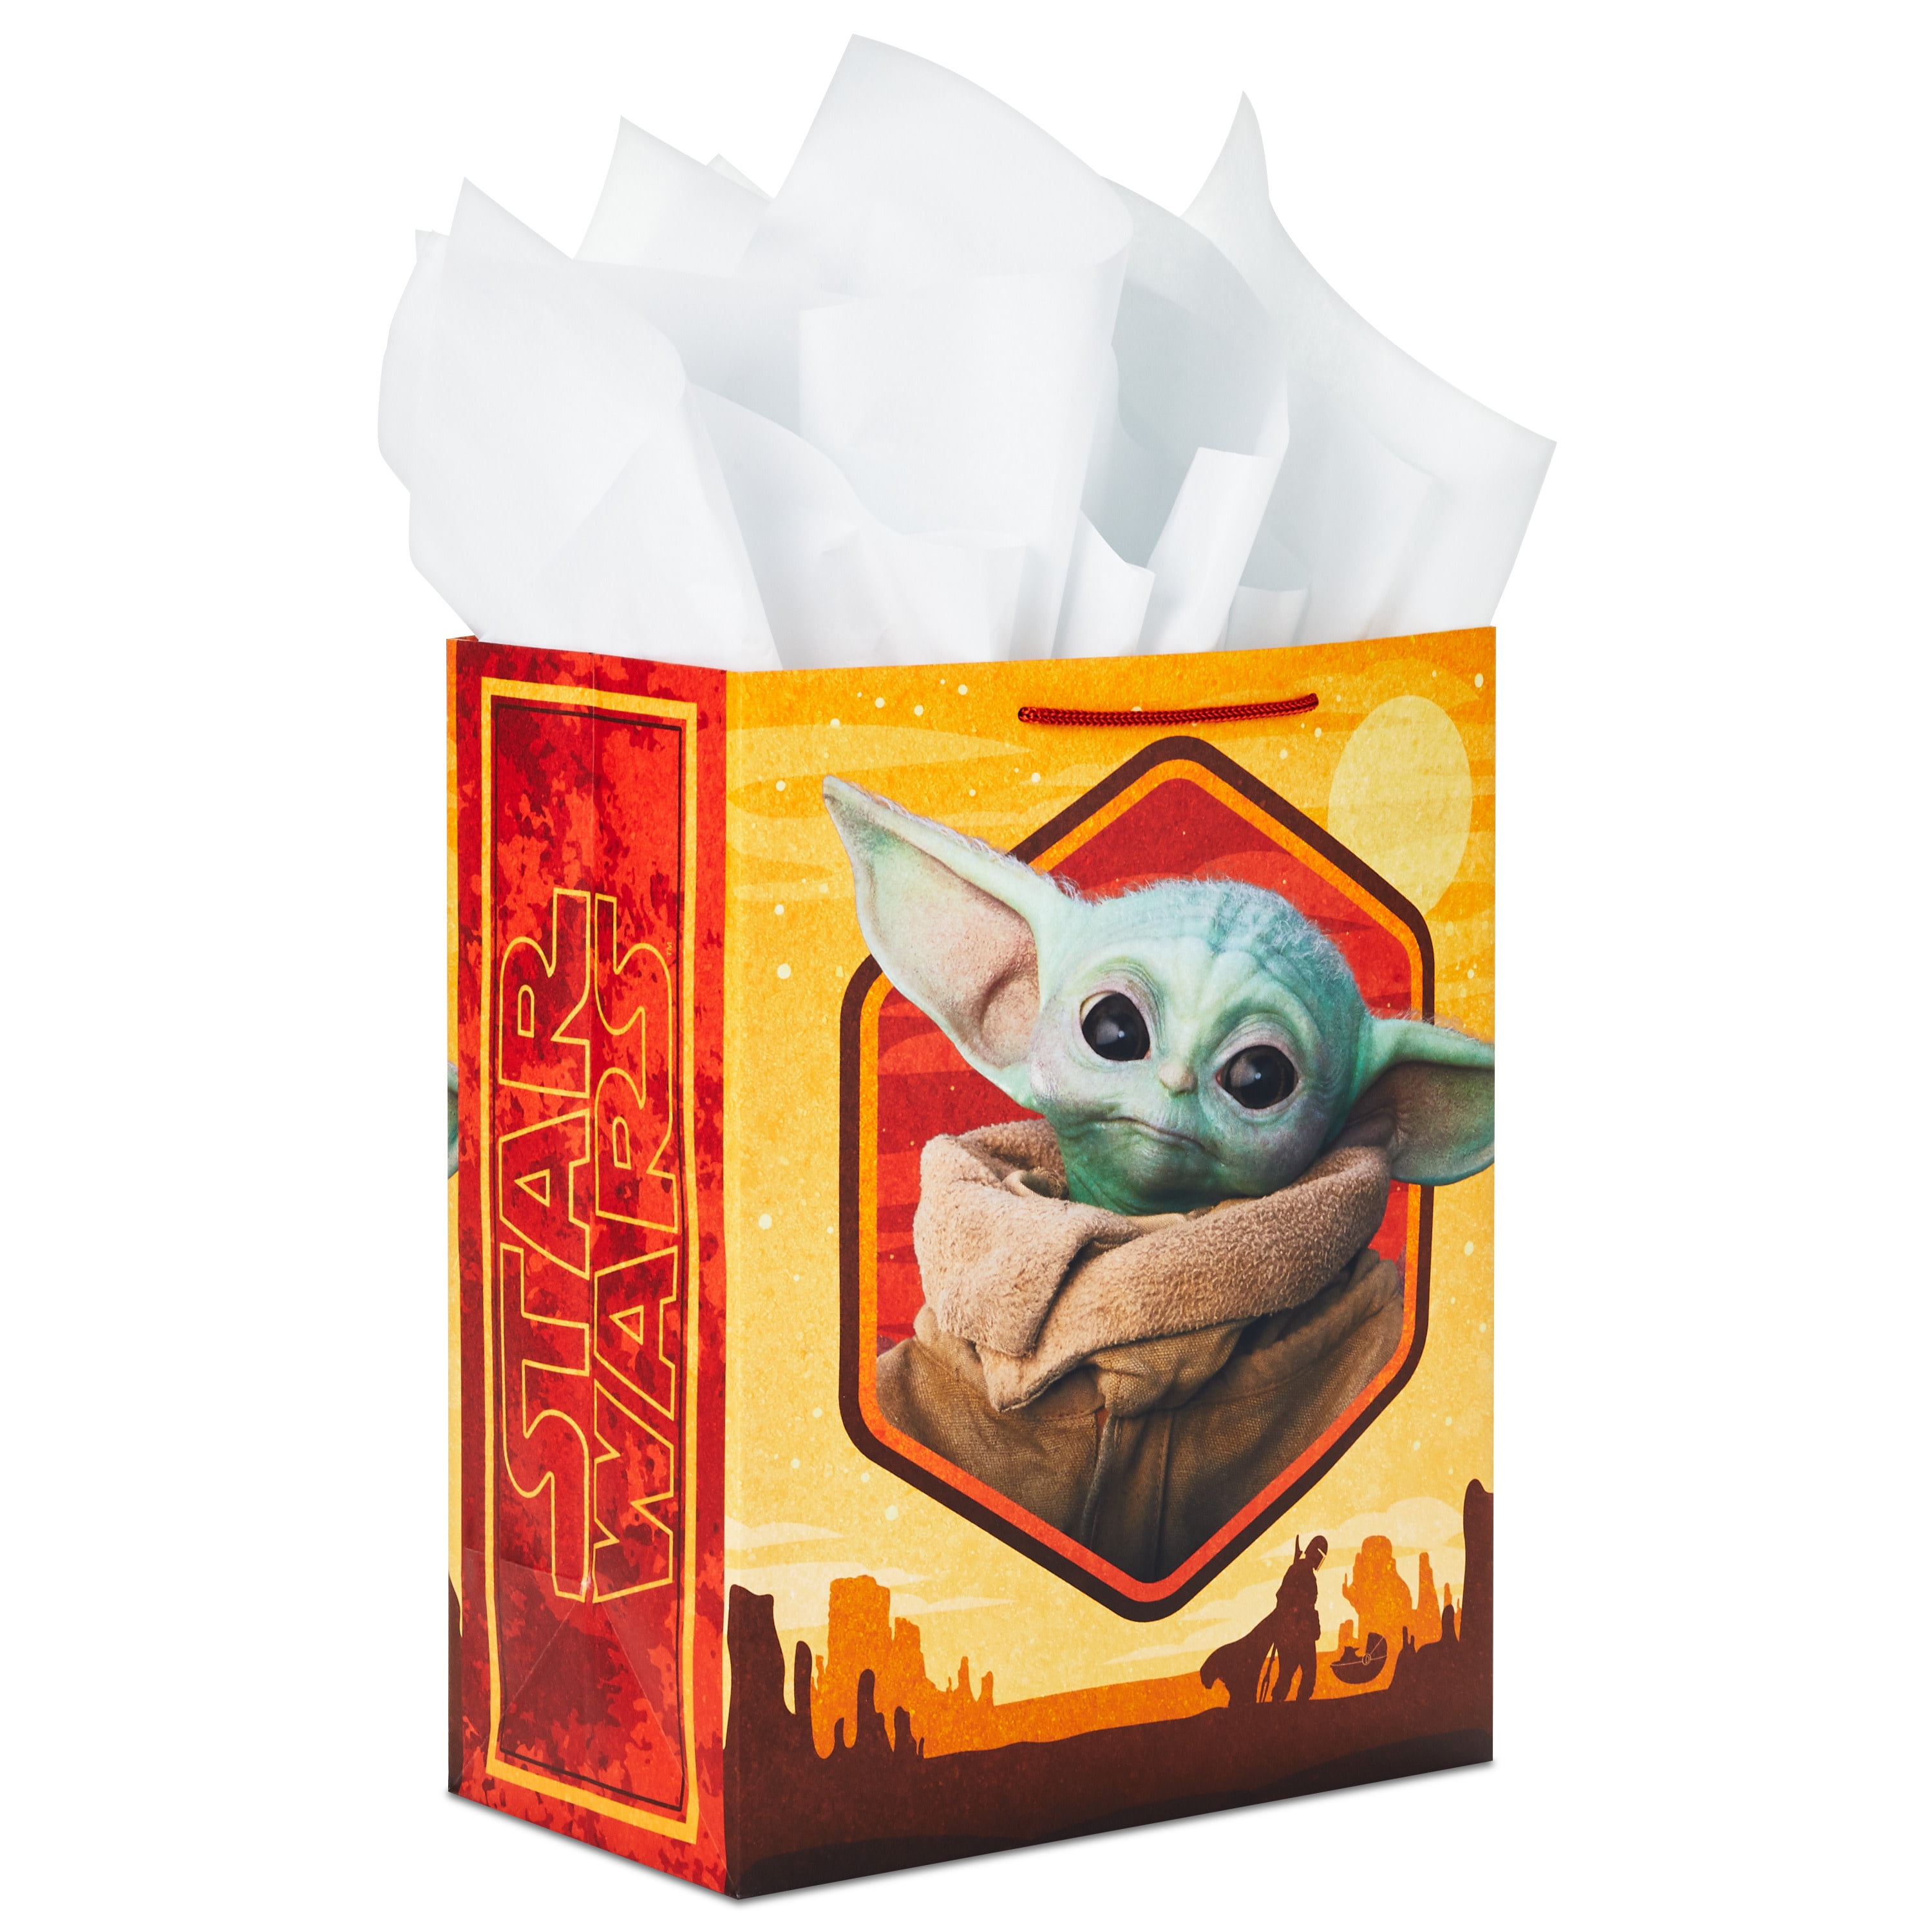 Hallmark 13 Large Star Wars Gift Bag with Tissue Paper (Baby Yoda, The Mandalorian) for Christmas, Birthdays, Baby Showers, Halloween, May The Fourth